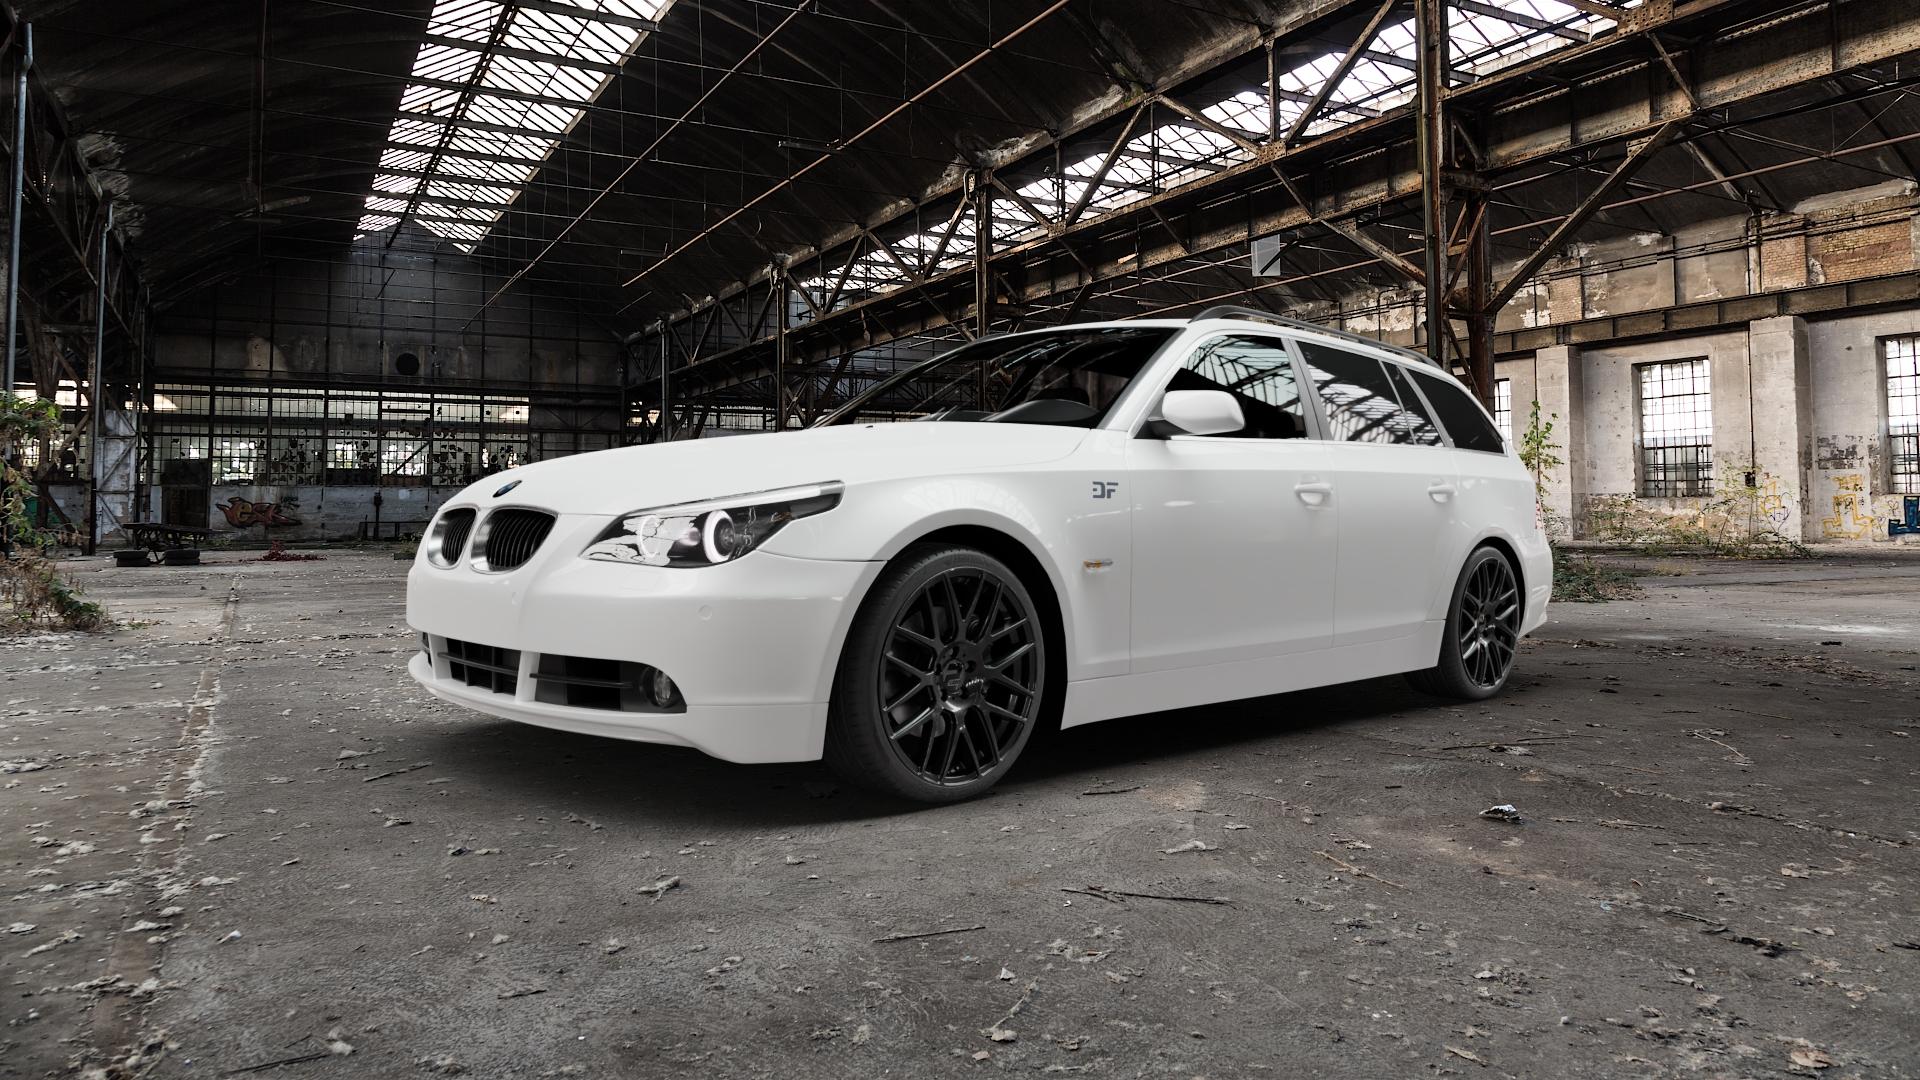 BMW 525xi Type E61 (Touring) 2,5l 160kW (218 hp) Wheels and Tyre Packages